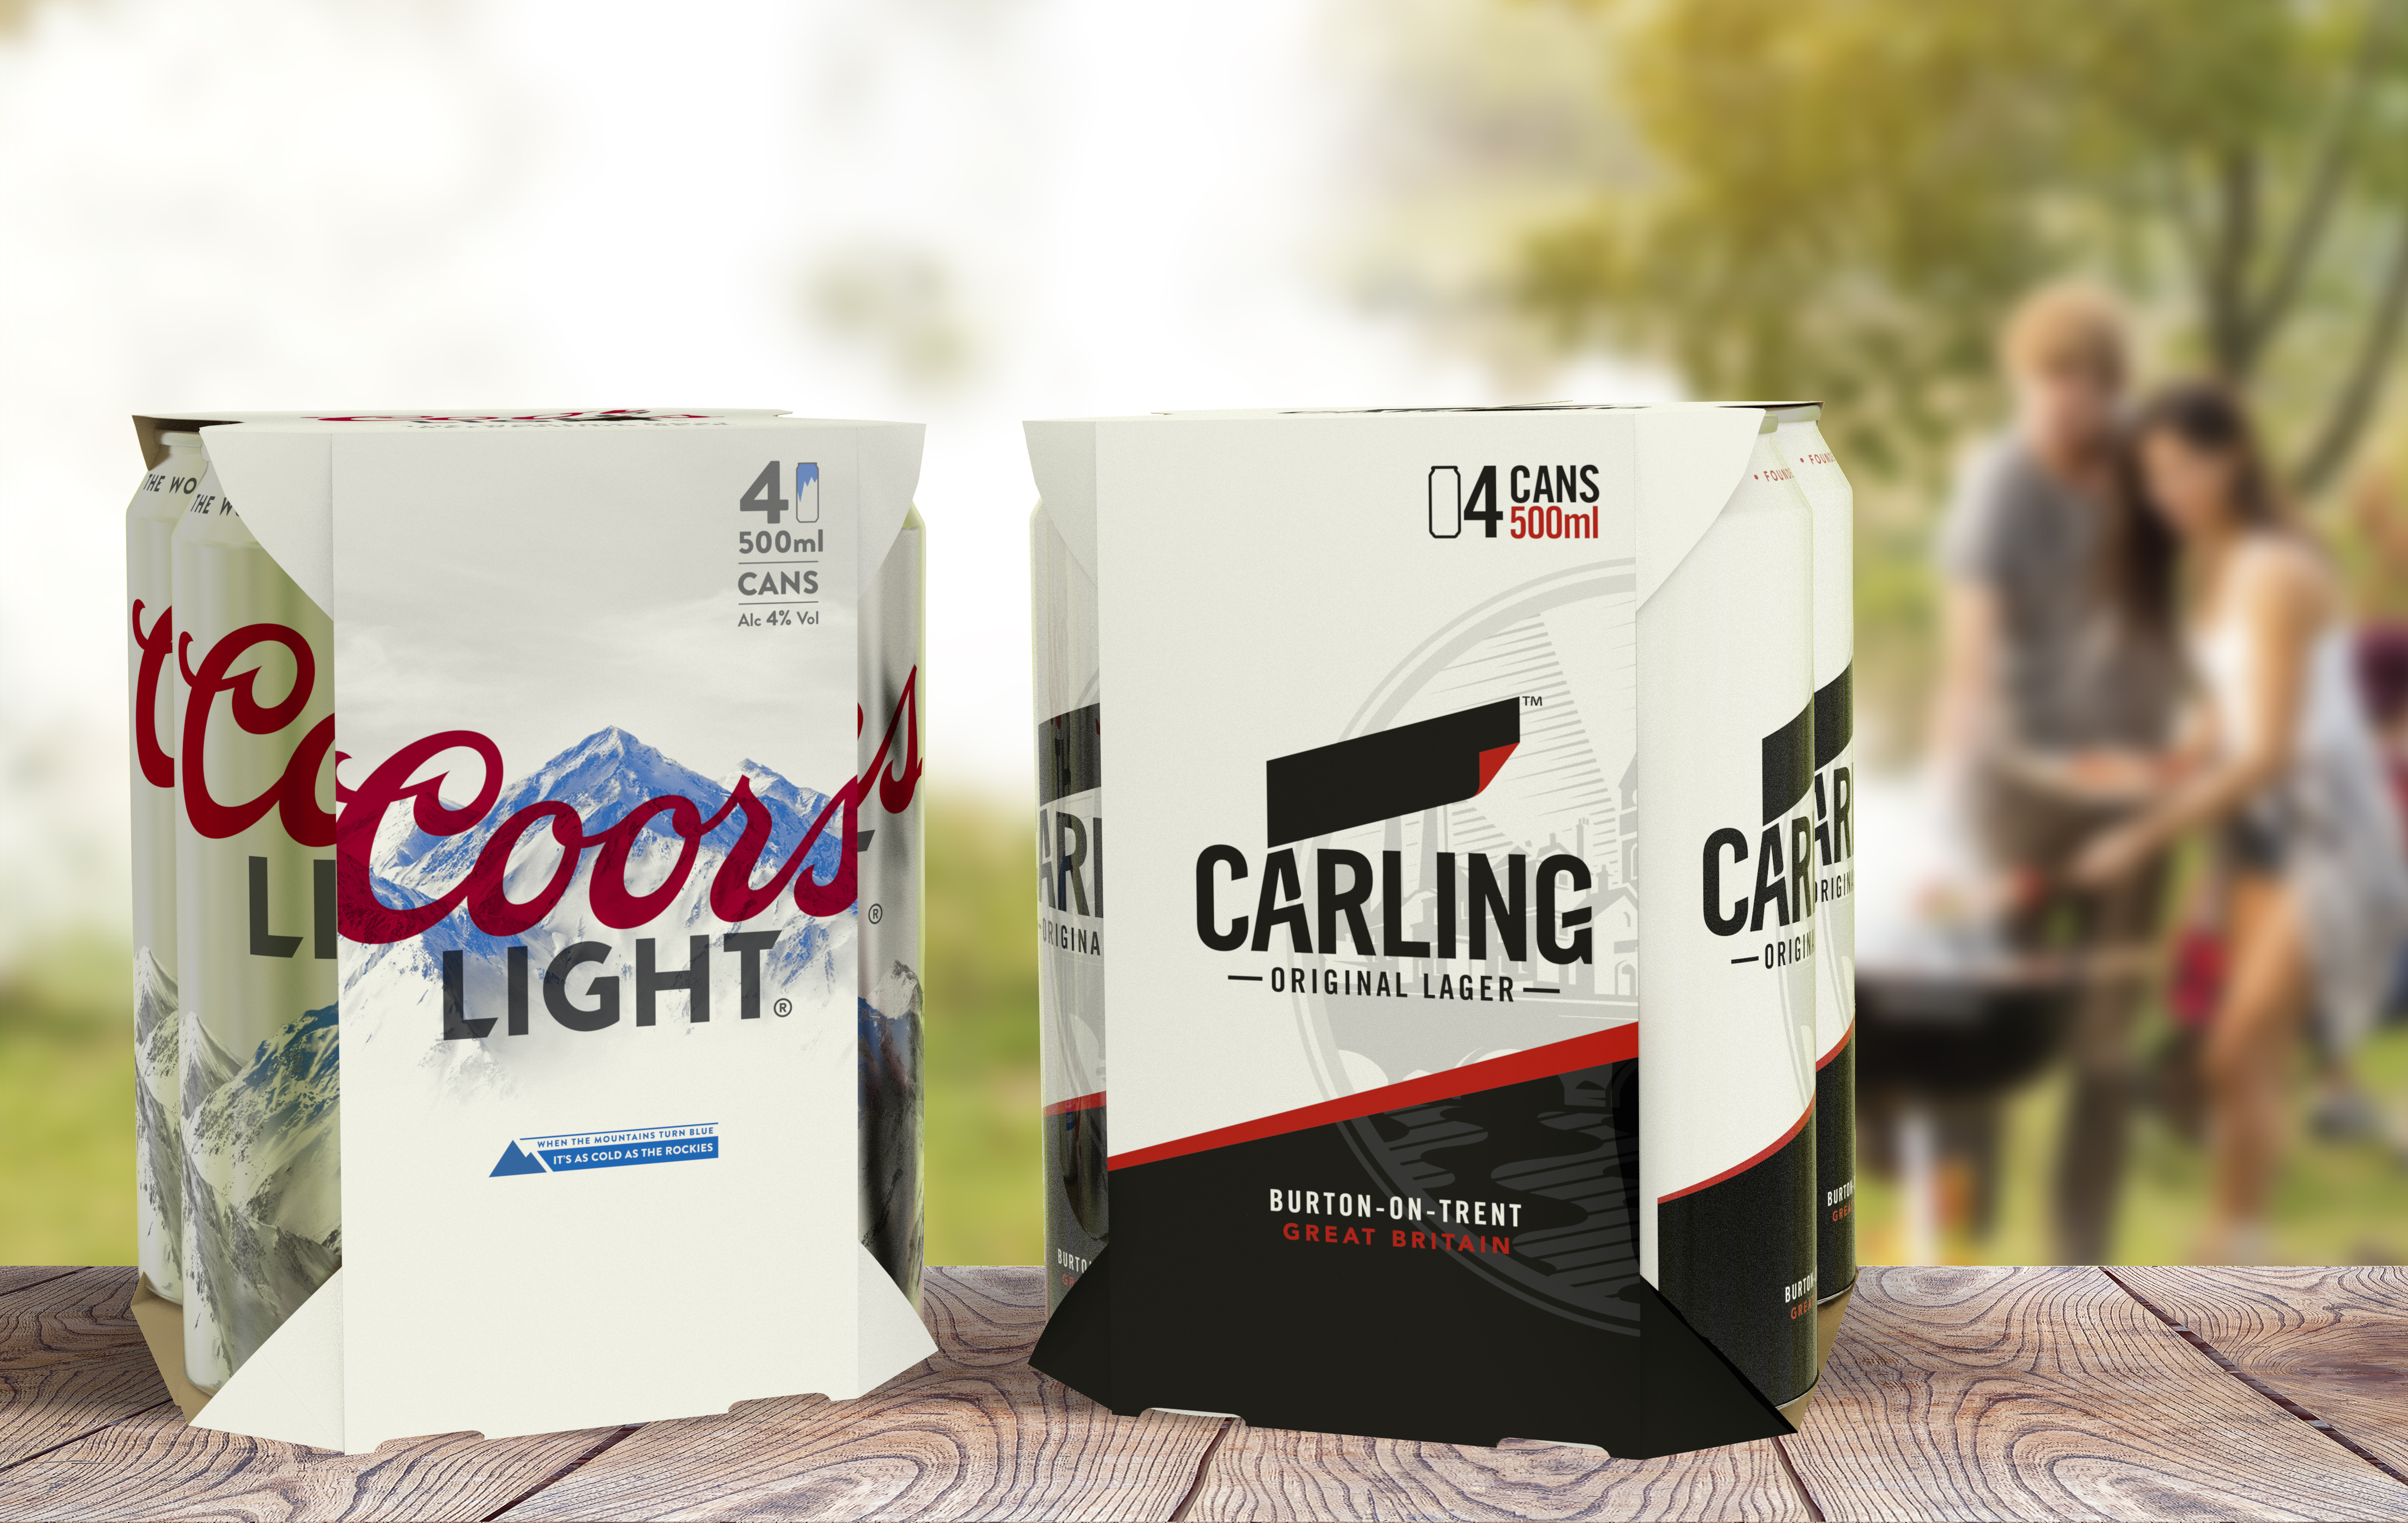 Coors Light and Carling new packaging in the U.K. 